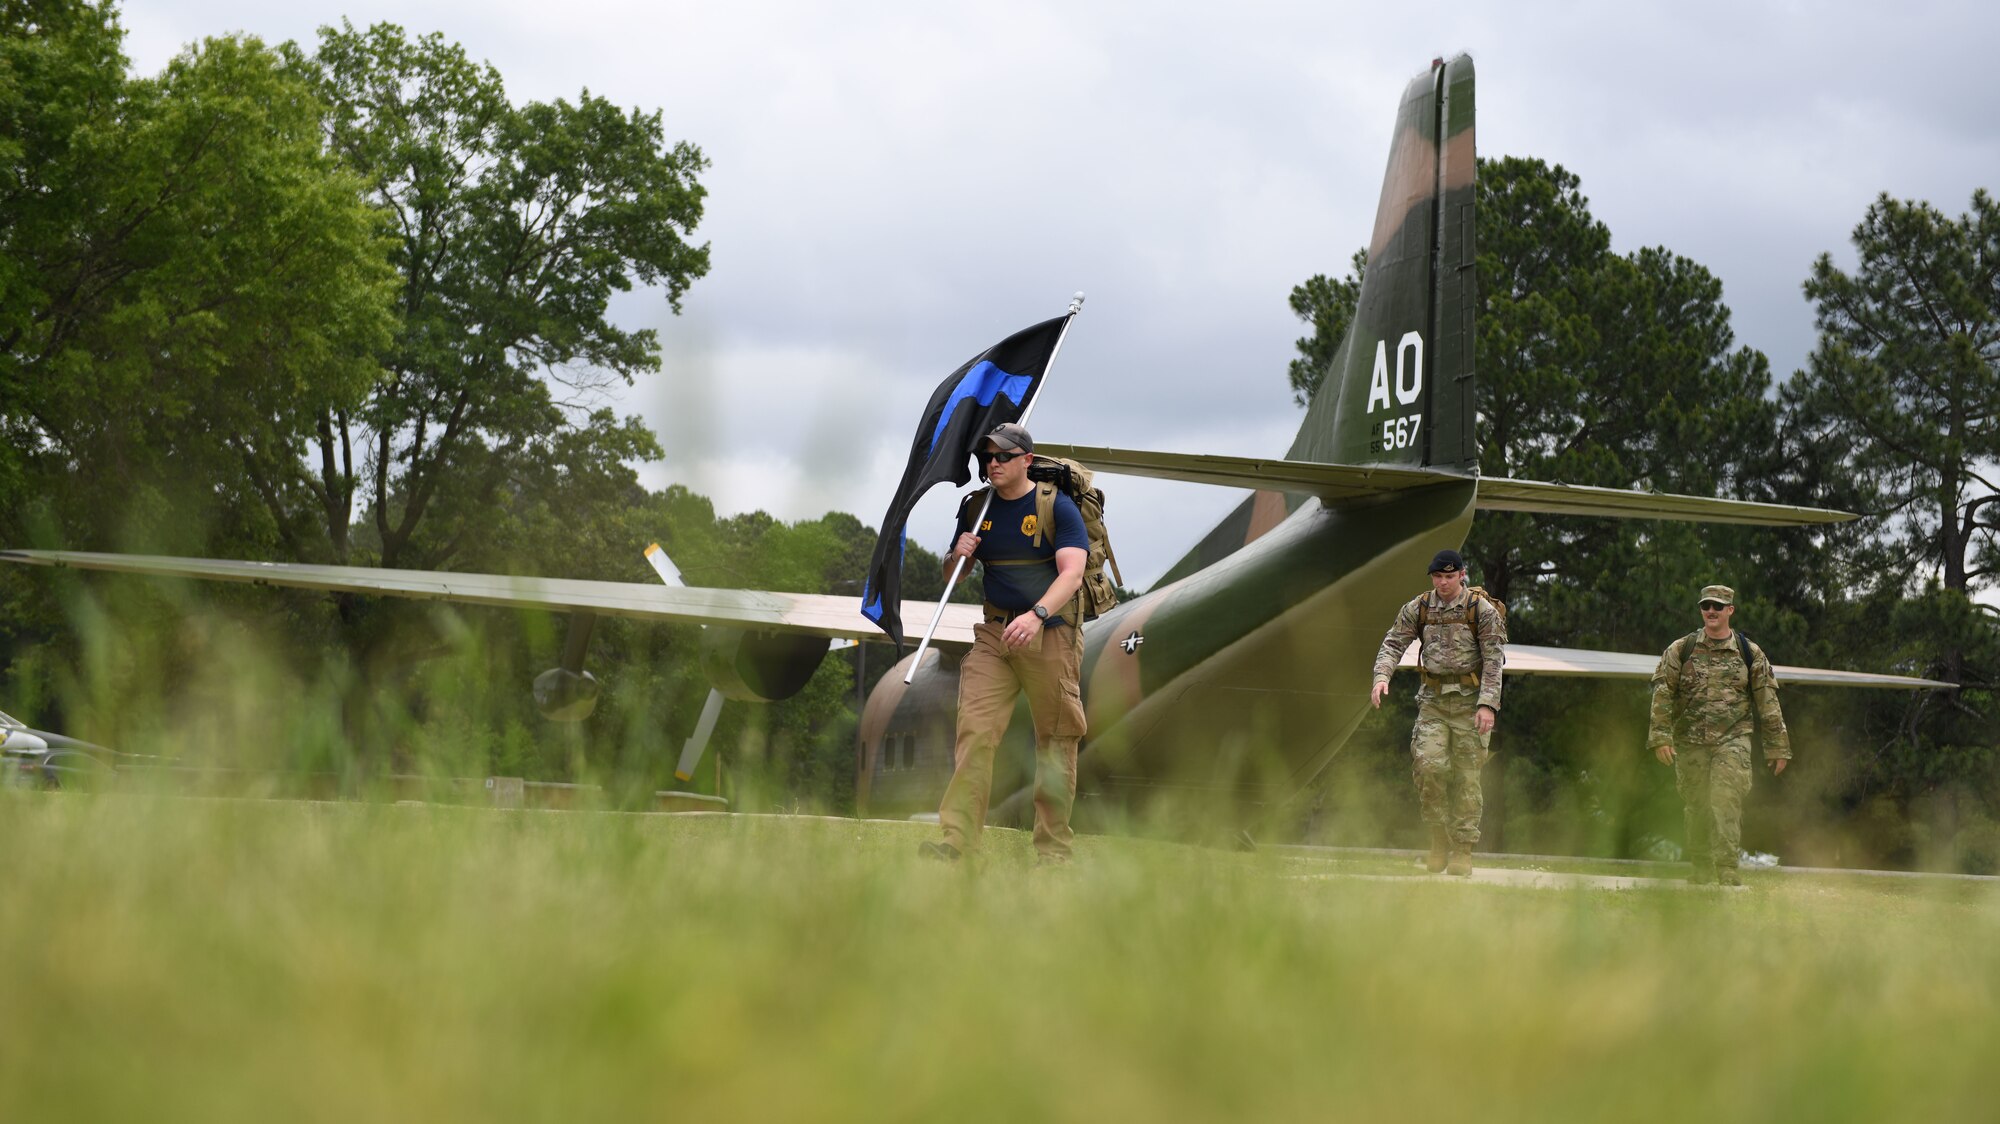 Man walking with Black flag with blue stripe down middle in front of a military Aircraft.